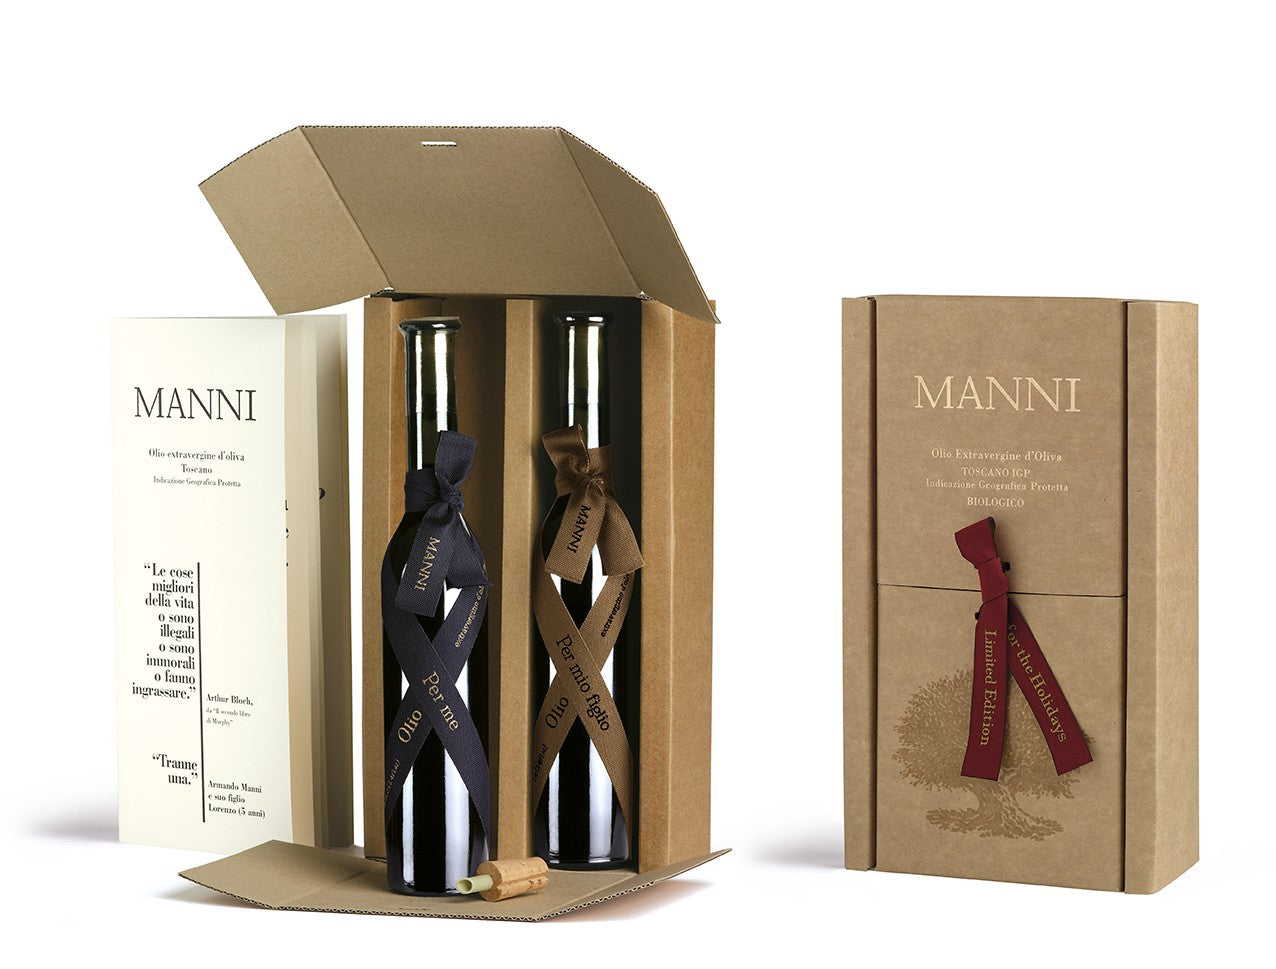 BEST BEFORE 01 June 2025 - Grand Cru Limited Edition for the Holidays: Per Me & Per Mio Figlio Organic Olive Oil Box Set - 2 bottles 100 ML/3.4 fl oz each